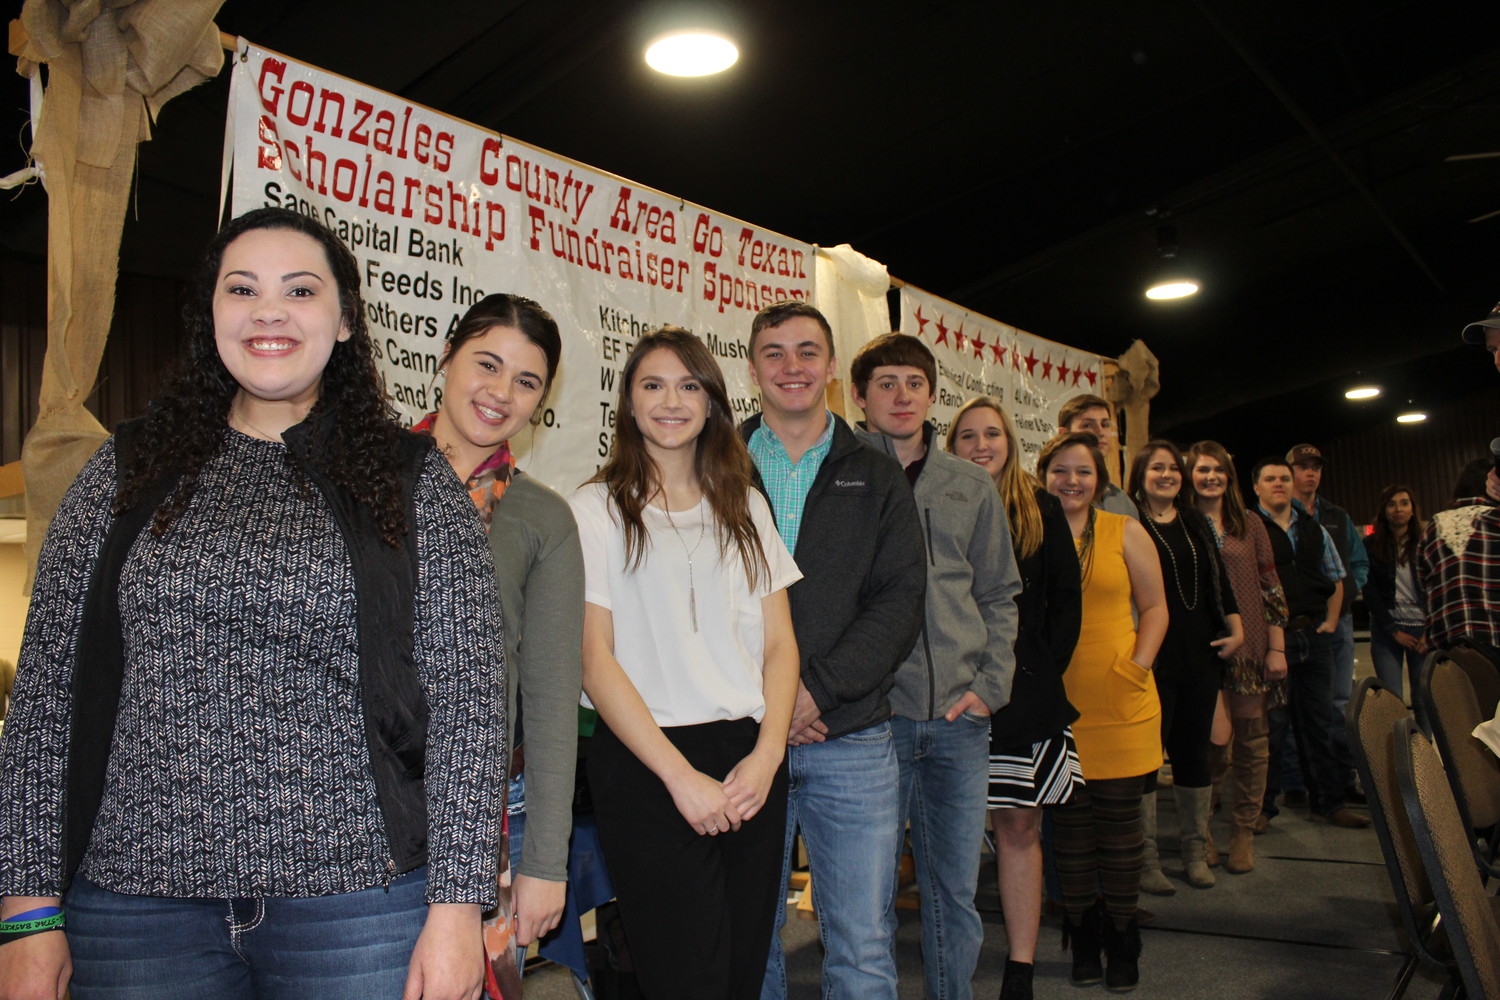 Last year the Gonzales County Area Go Texas Scholarship Fund issued $71,950 in scholarships, to 16 students. These allocations were made through the generosity of donors attending the annual Steak Night Scholarship Fundraiser, held in January; and, through the Gonzales County Area Go Texan Tractor Pull and Cook-off held in September.